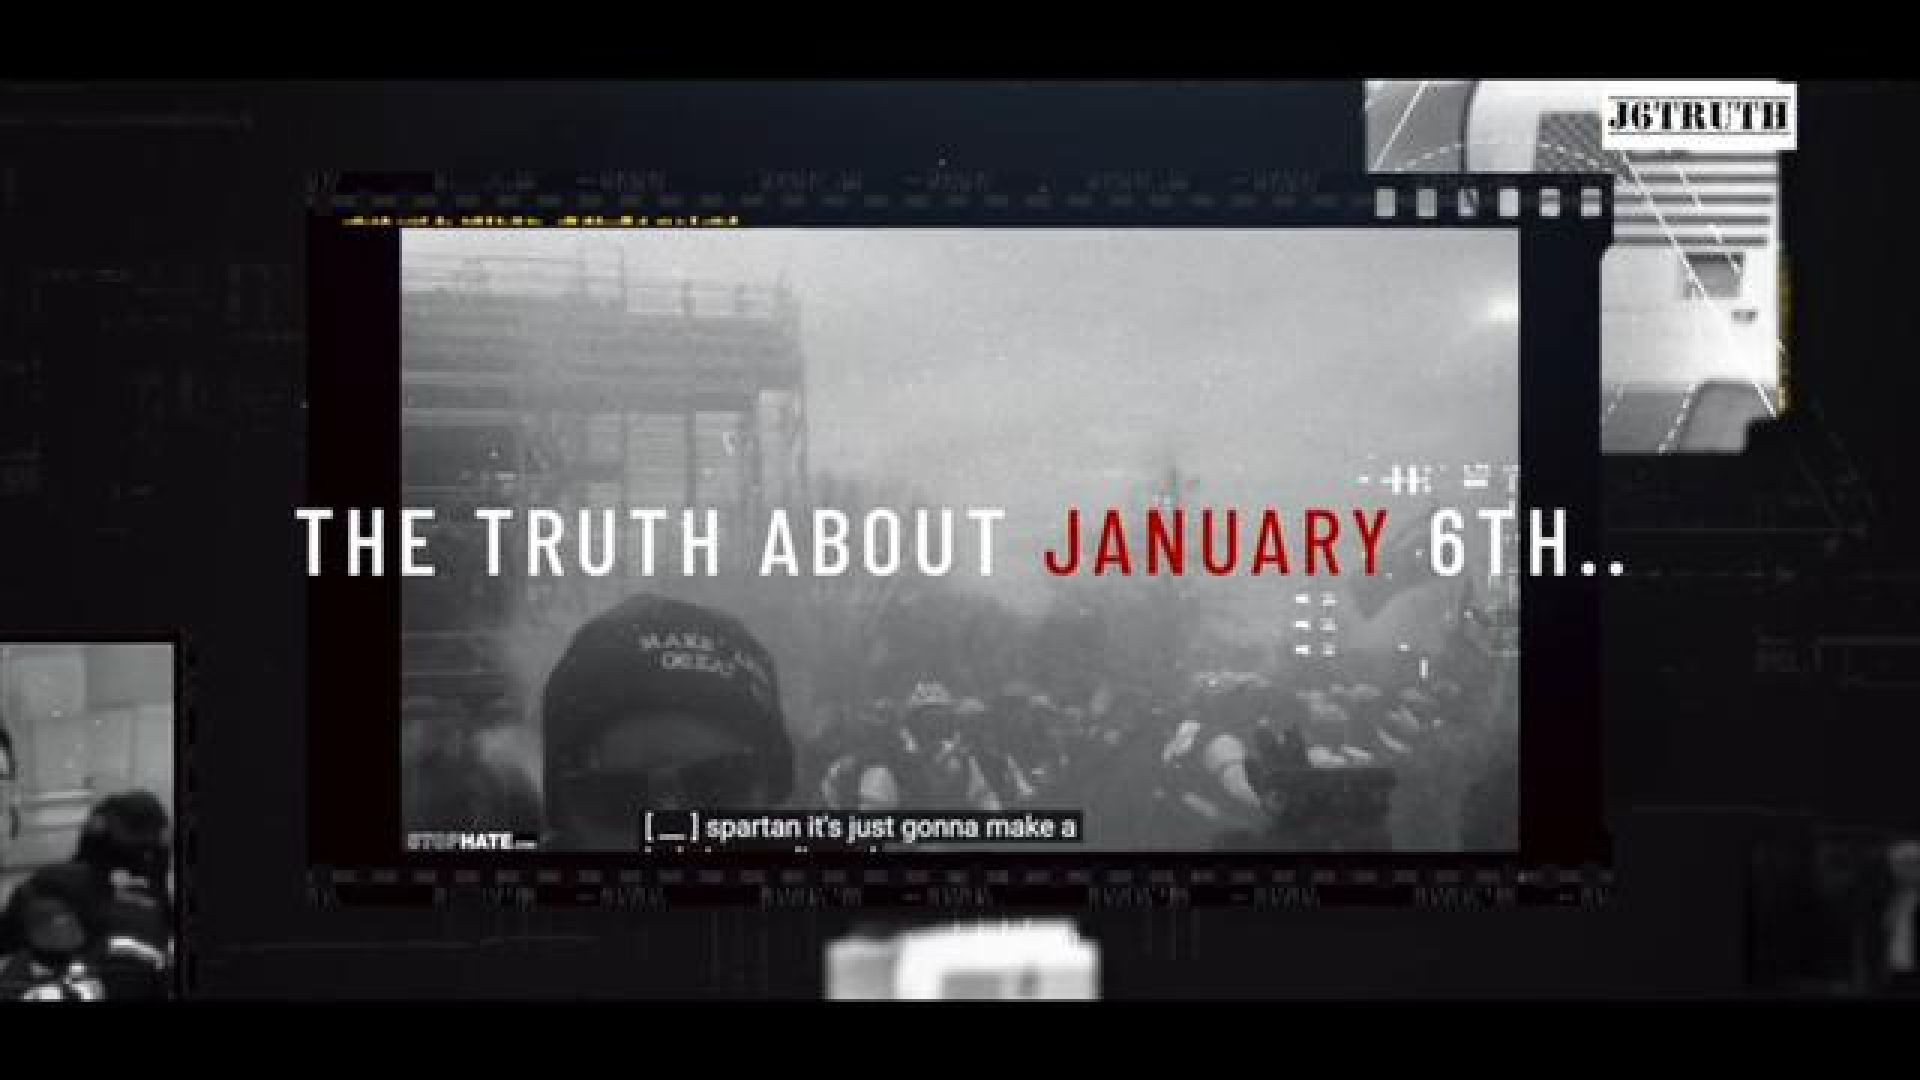 THE TRUTH ABOUT JANUARY 6TH DOCUMENTARY